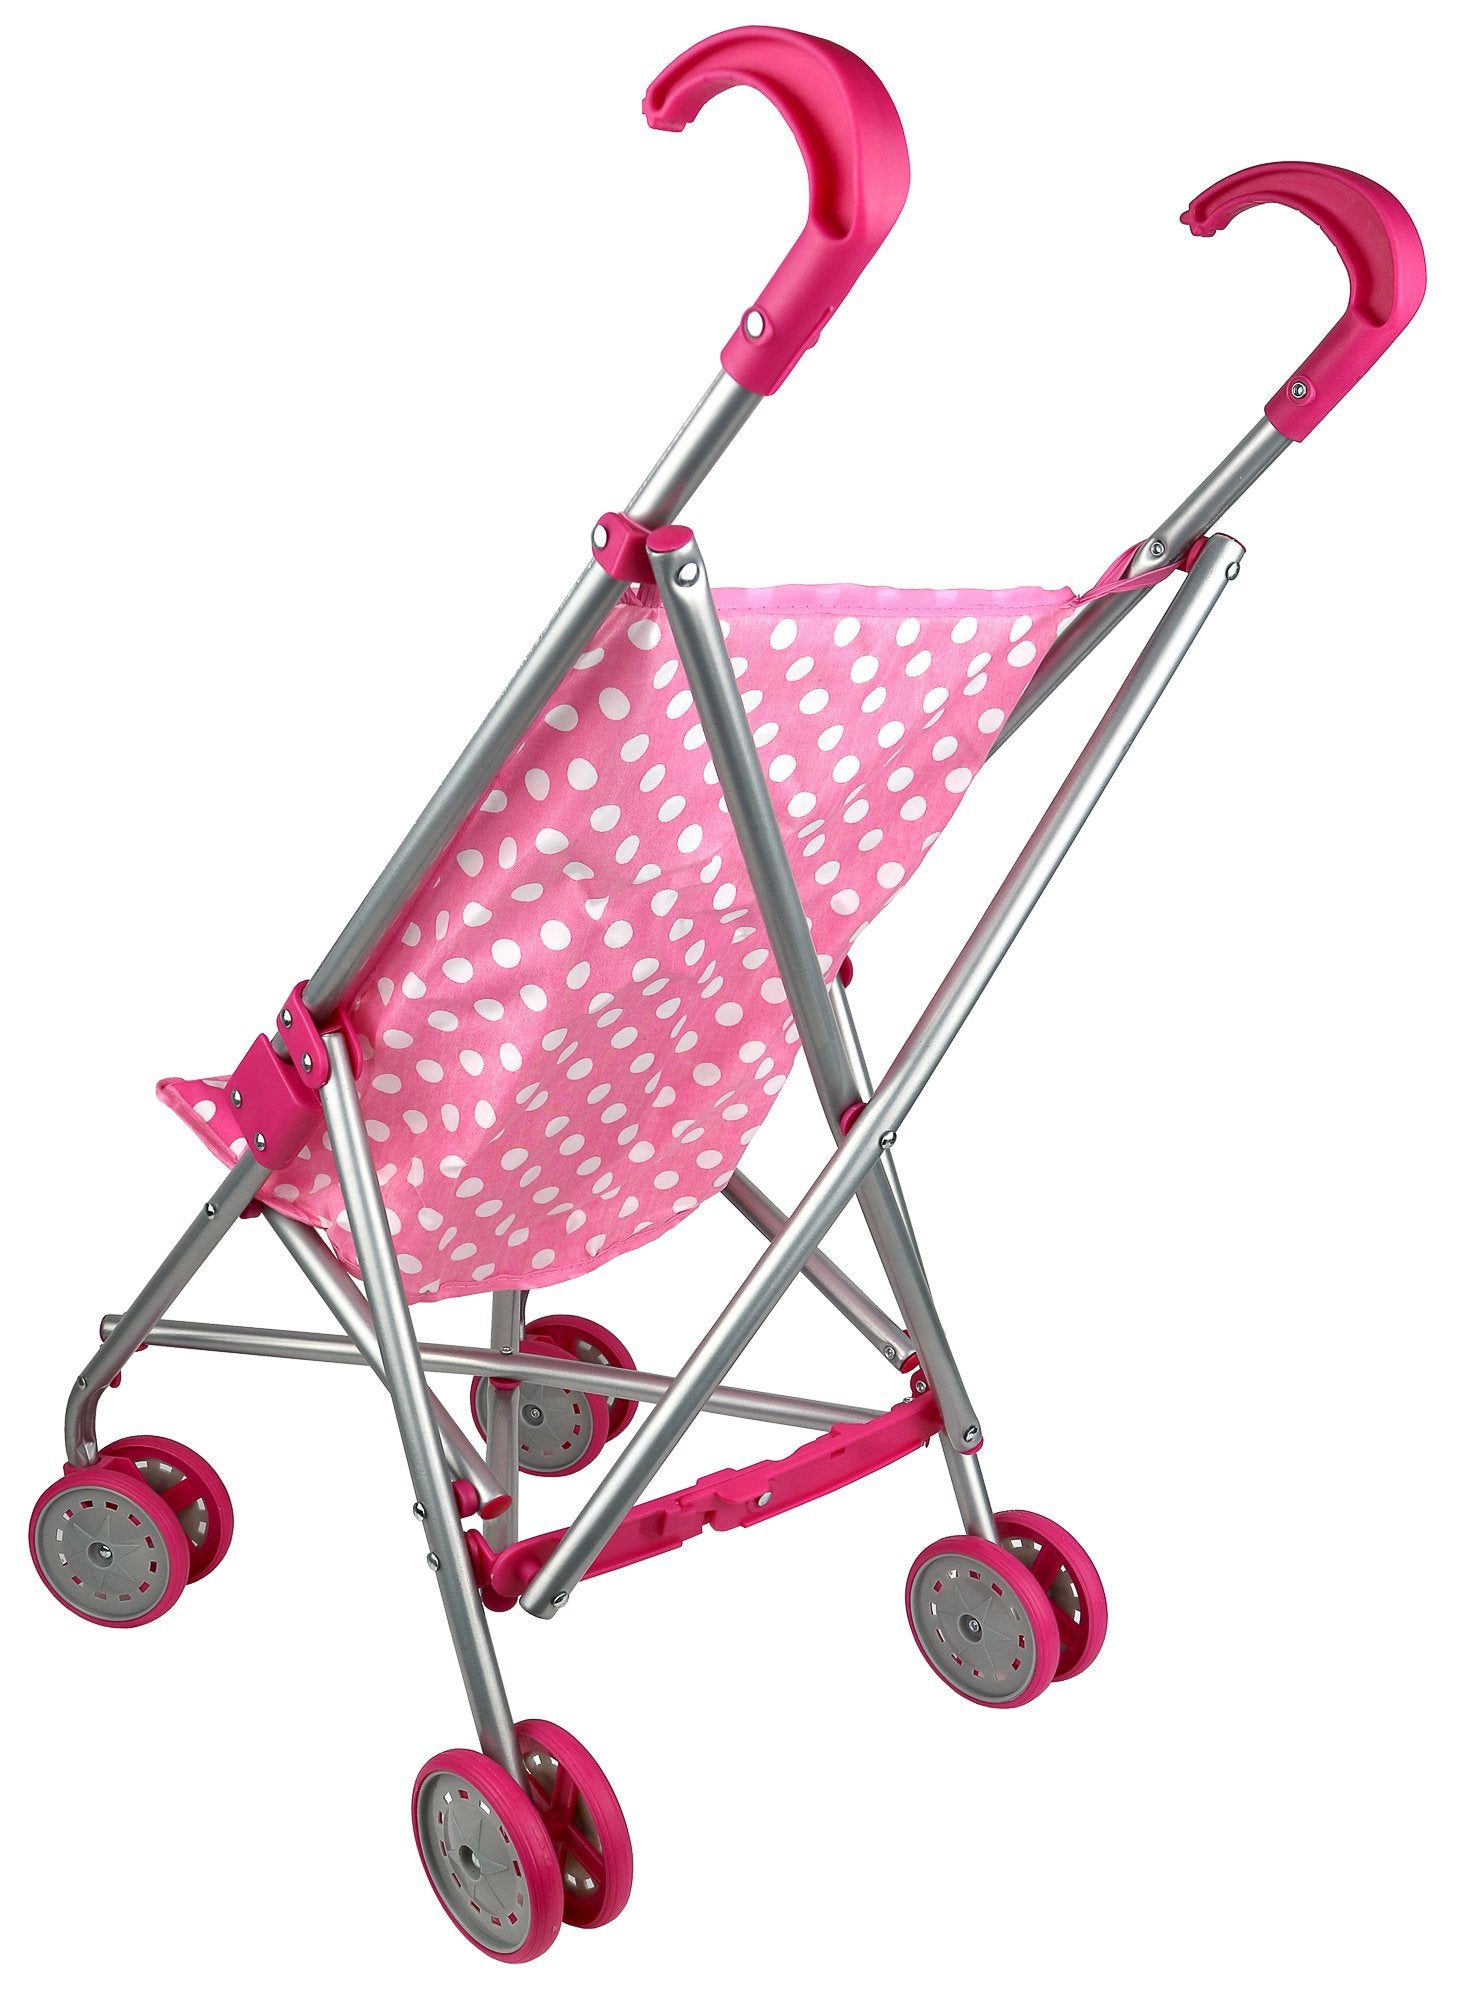 Precious Toys Baby Doll Stroller, Foldable Play Stroller, Fits Dolls 18 Inches, Extra Stability, Fully Assembled, Color Pink and White Polka Dots, Lead Free Paint, Gifts for Toddlers and Girls Ages 2+